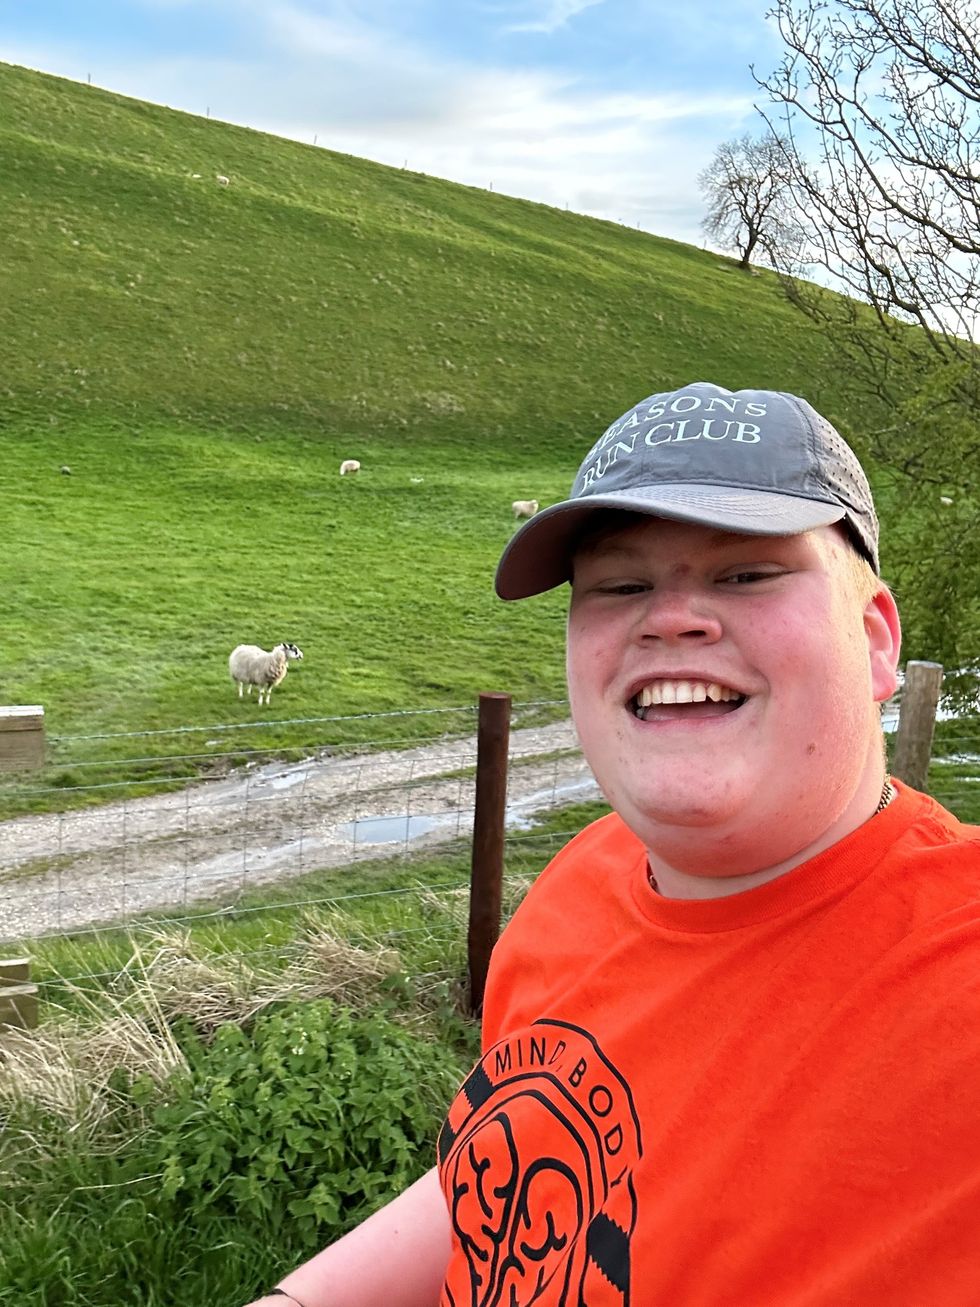 Teenage taking selfie with sheep in the background